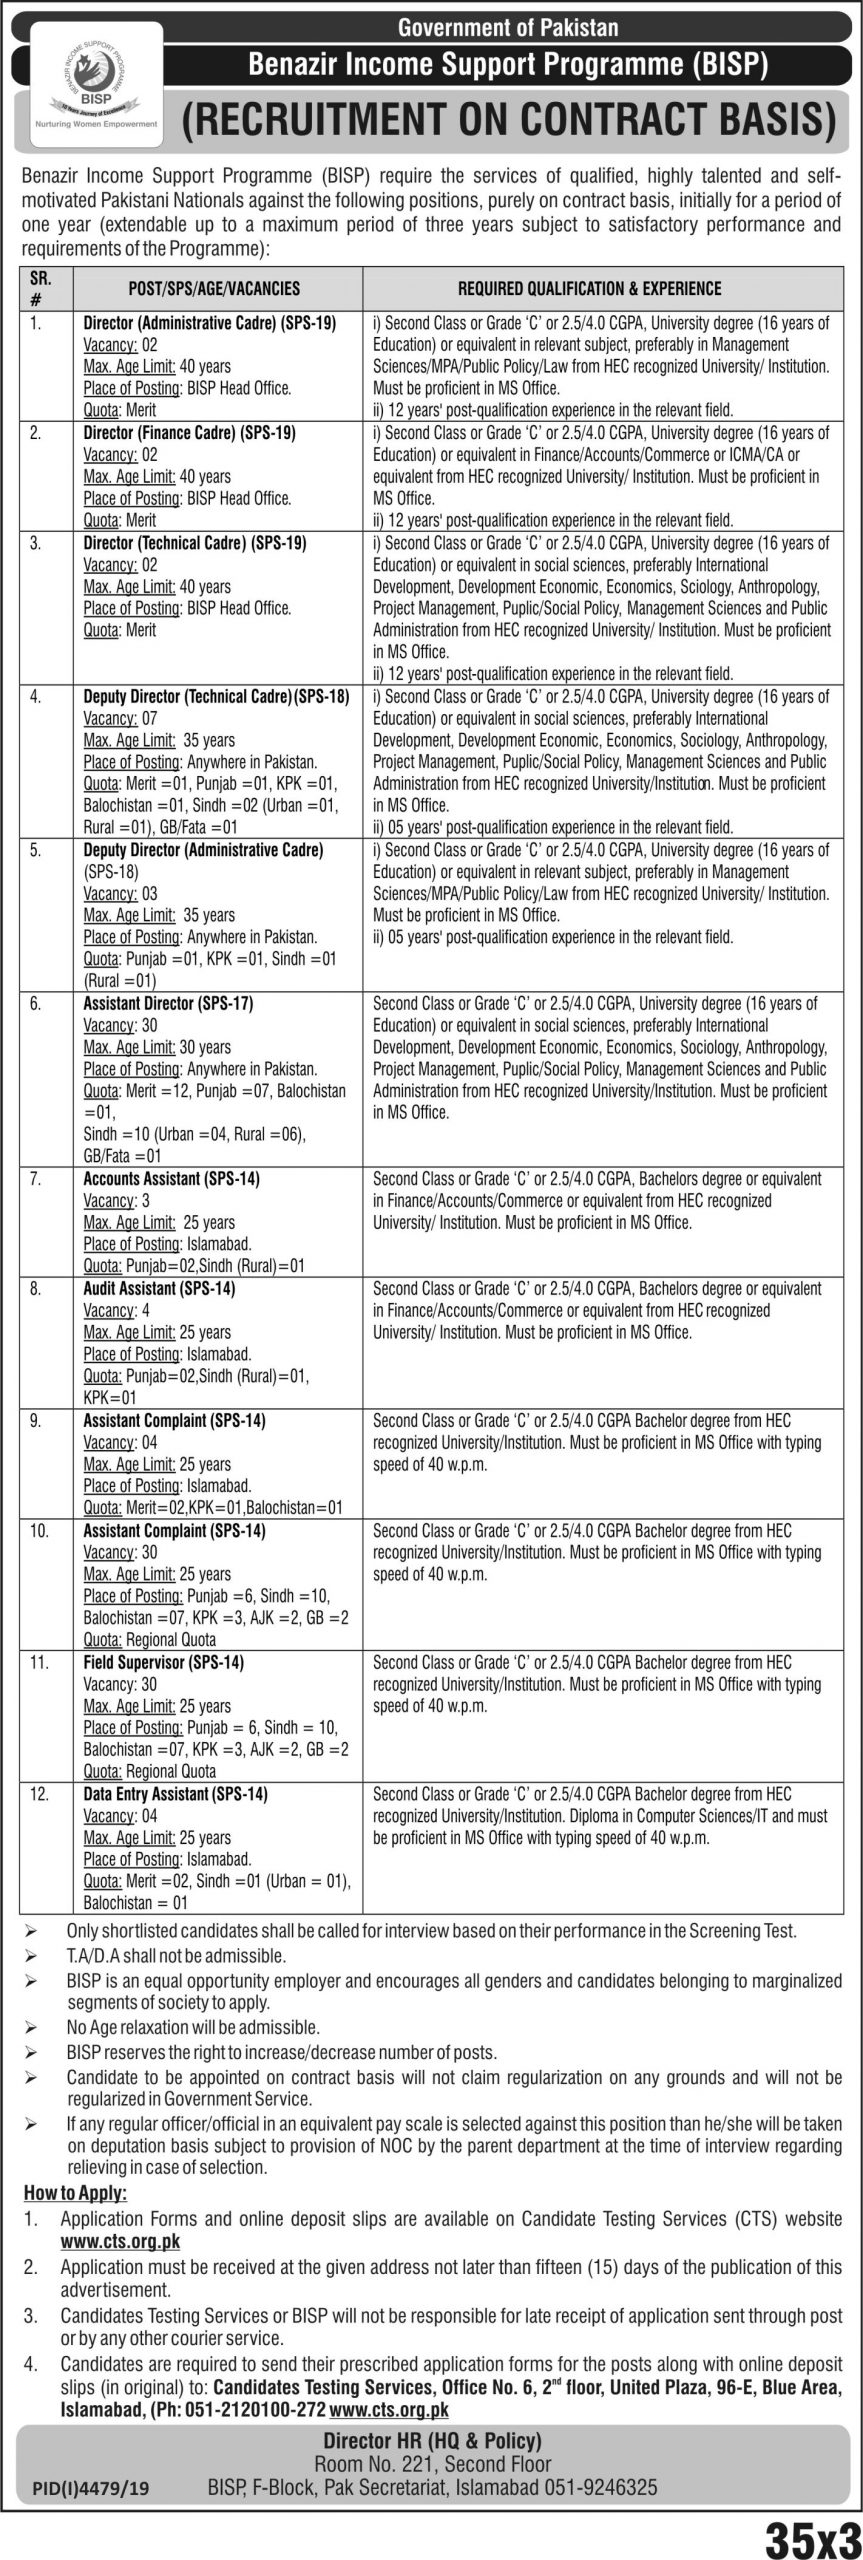 Benazir Income Support Programme Jobs 2023 CTS Application Form Eligibility Criteria